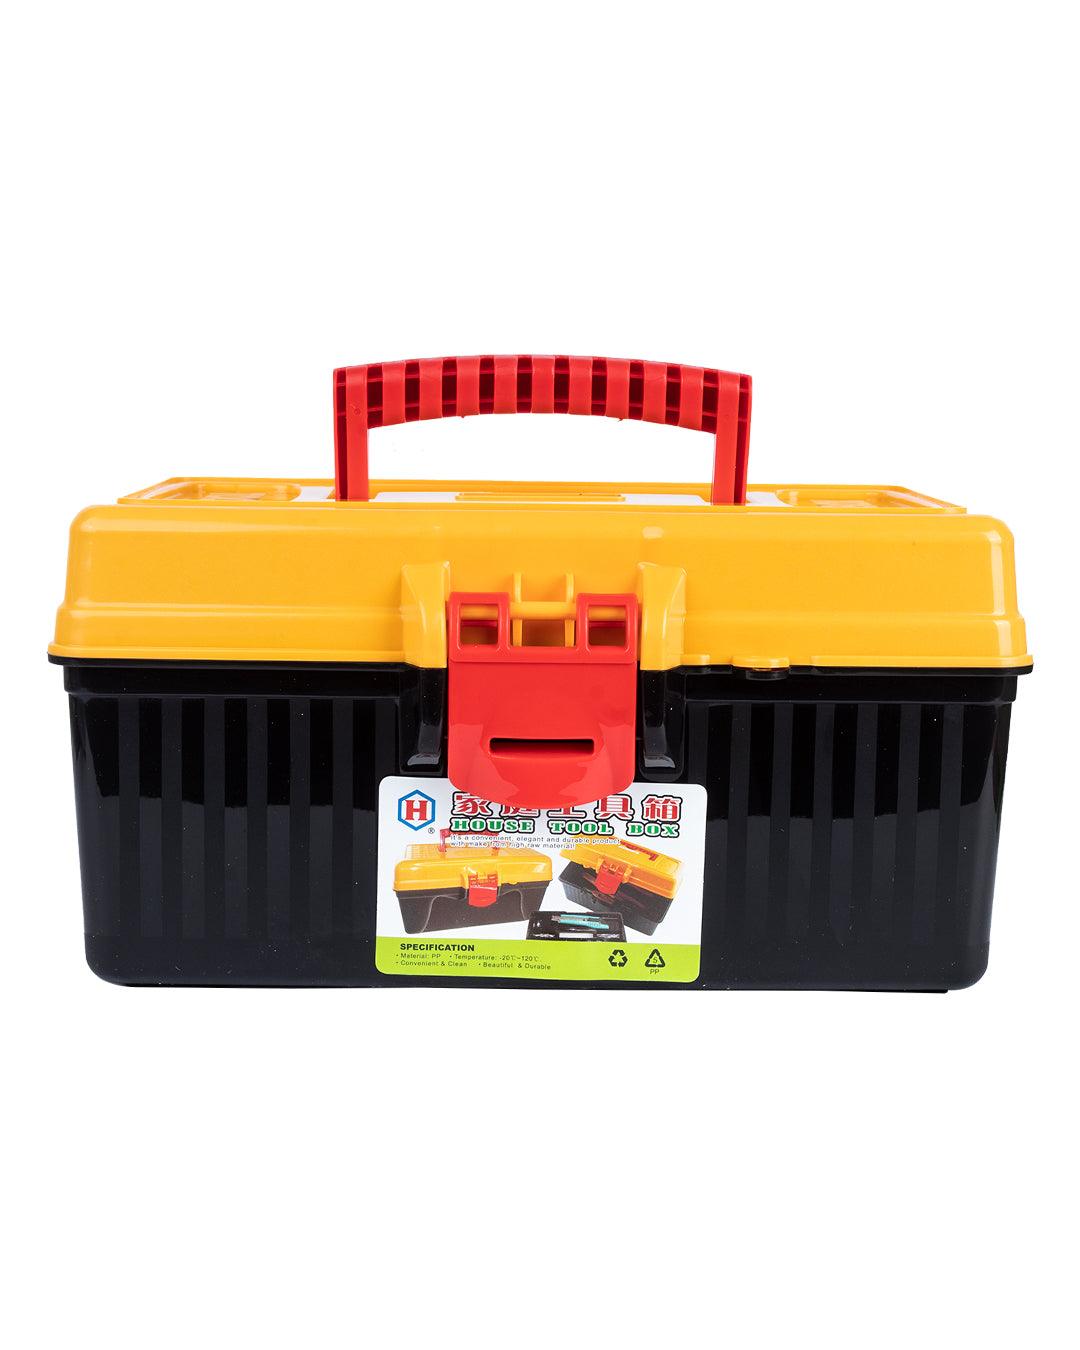 Buy Heavy Duty Tool Box, Black & Yellow, Plastic at the best price